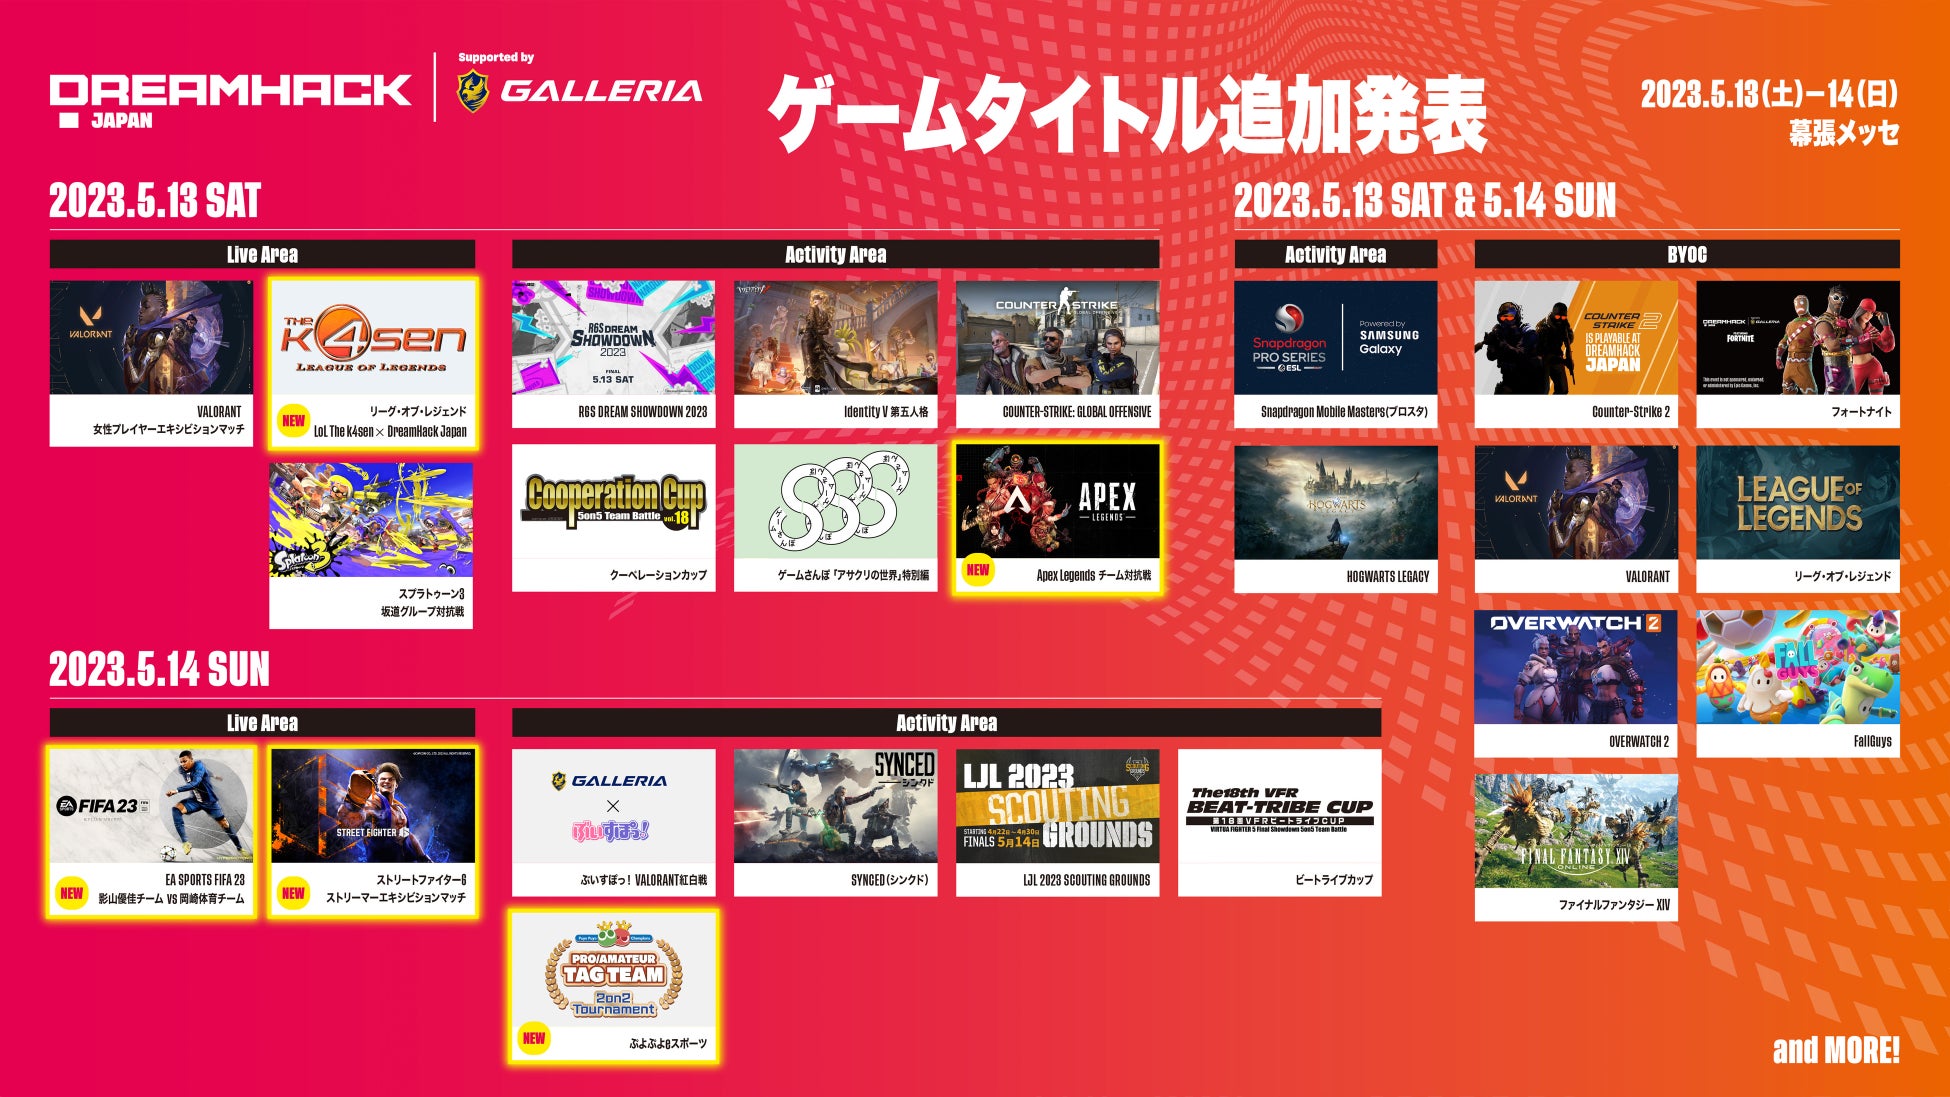 「DreamHack Japan 2023 Supported by GALLERIA」ゲームタイトル 第8弾追加発表！